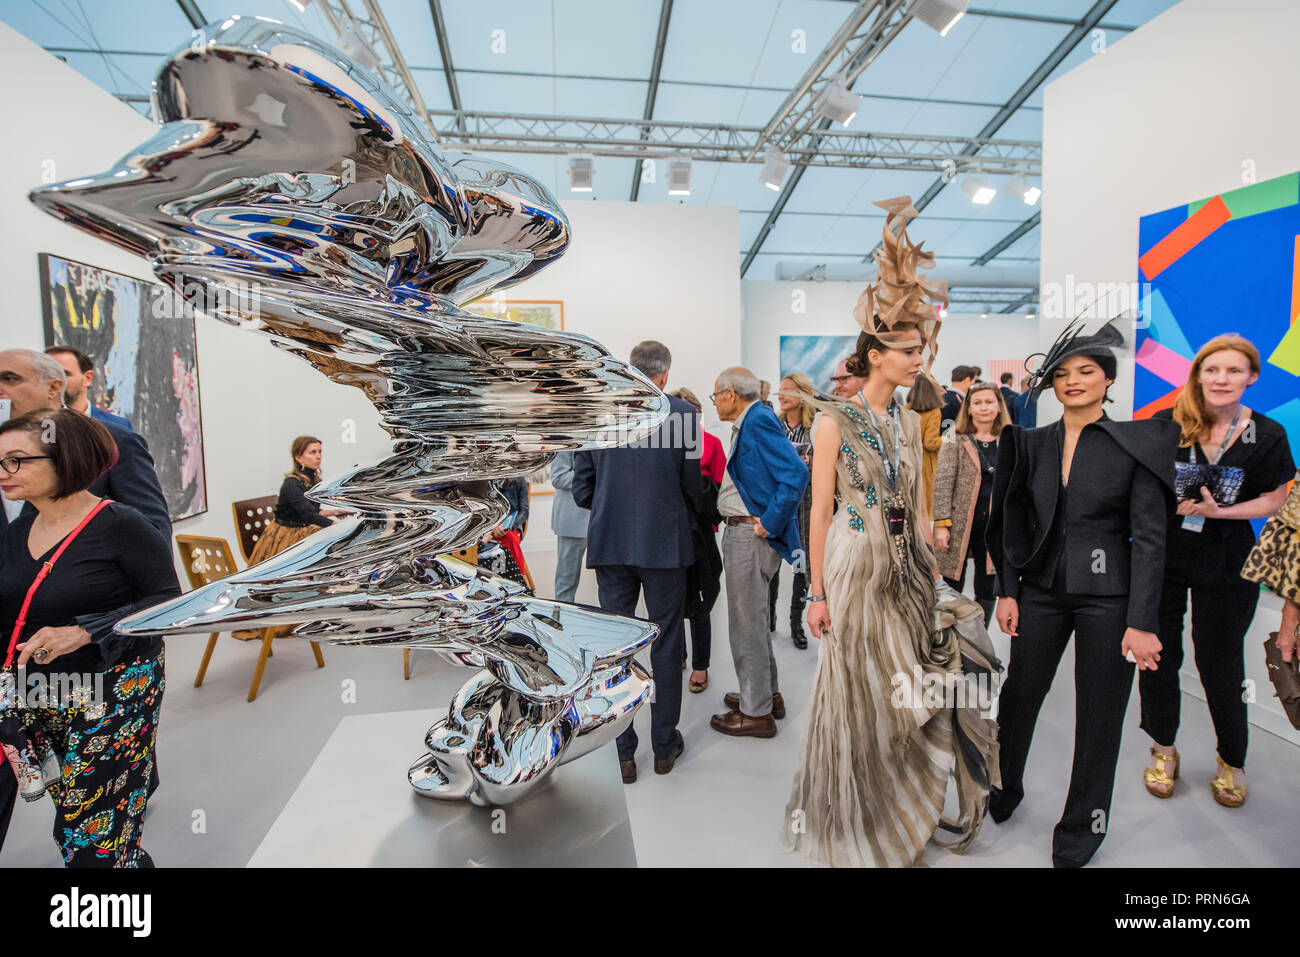 Regents Park, London, UK. 3rd Oct 2018. Gate 2017 by Tony Cragg in Galerie Thadeus Roppac - The Frieze Art Fair in Regents Park. It remains open till 7 Oct 2018.  Credit: Guy Bell/Alamy Live News Stock Photo